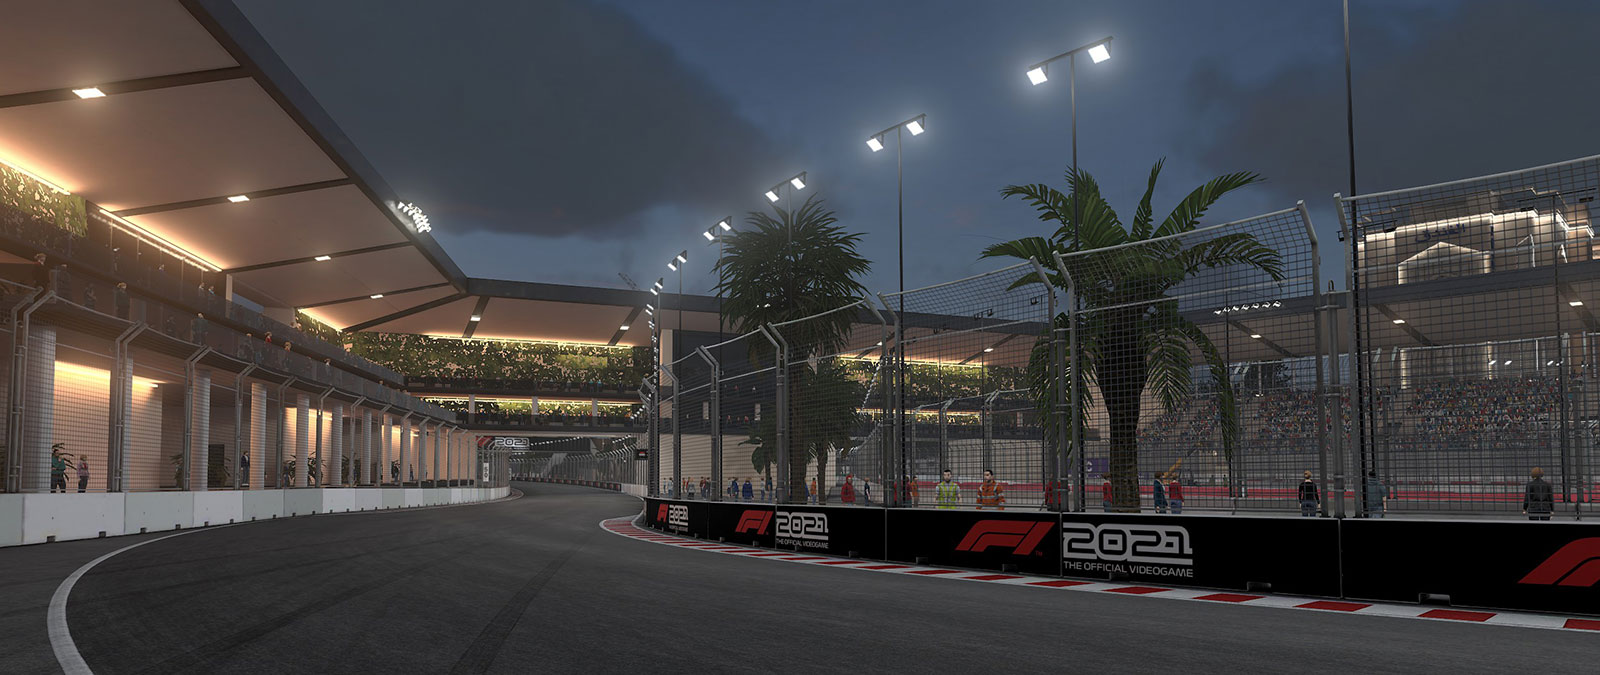 Just after sundown an F1 track is lit by streetlights as fans watch from the stands.